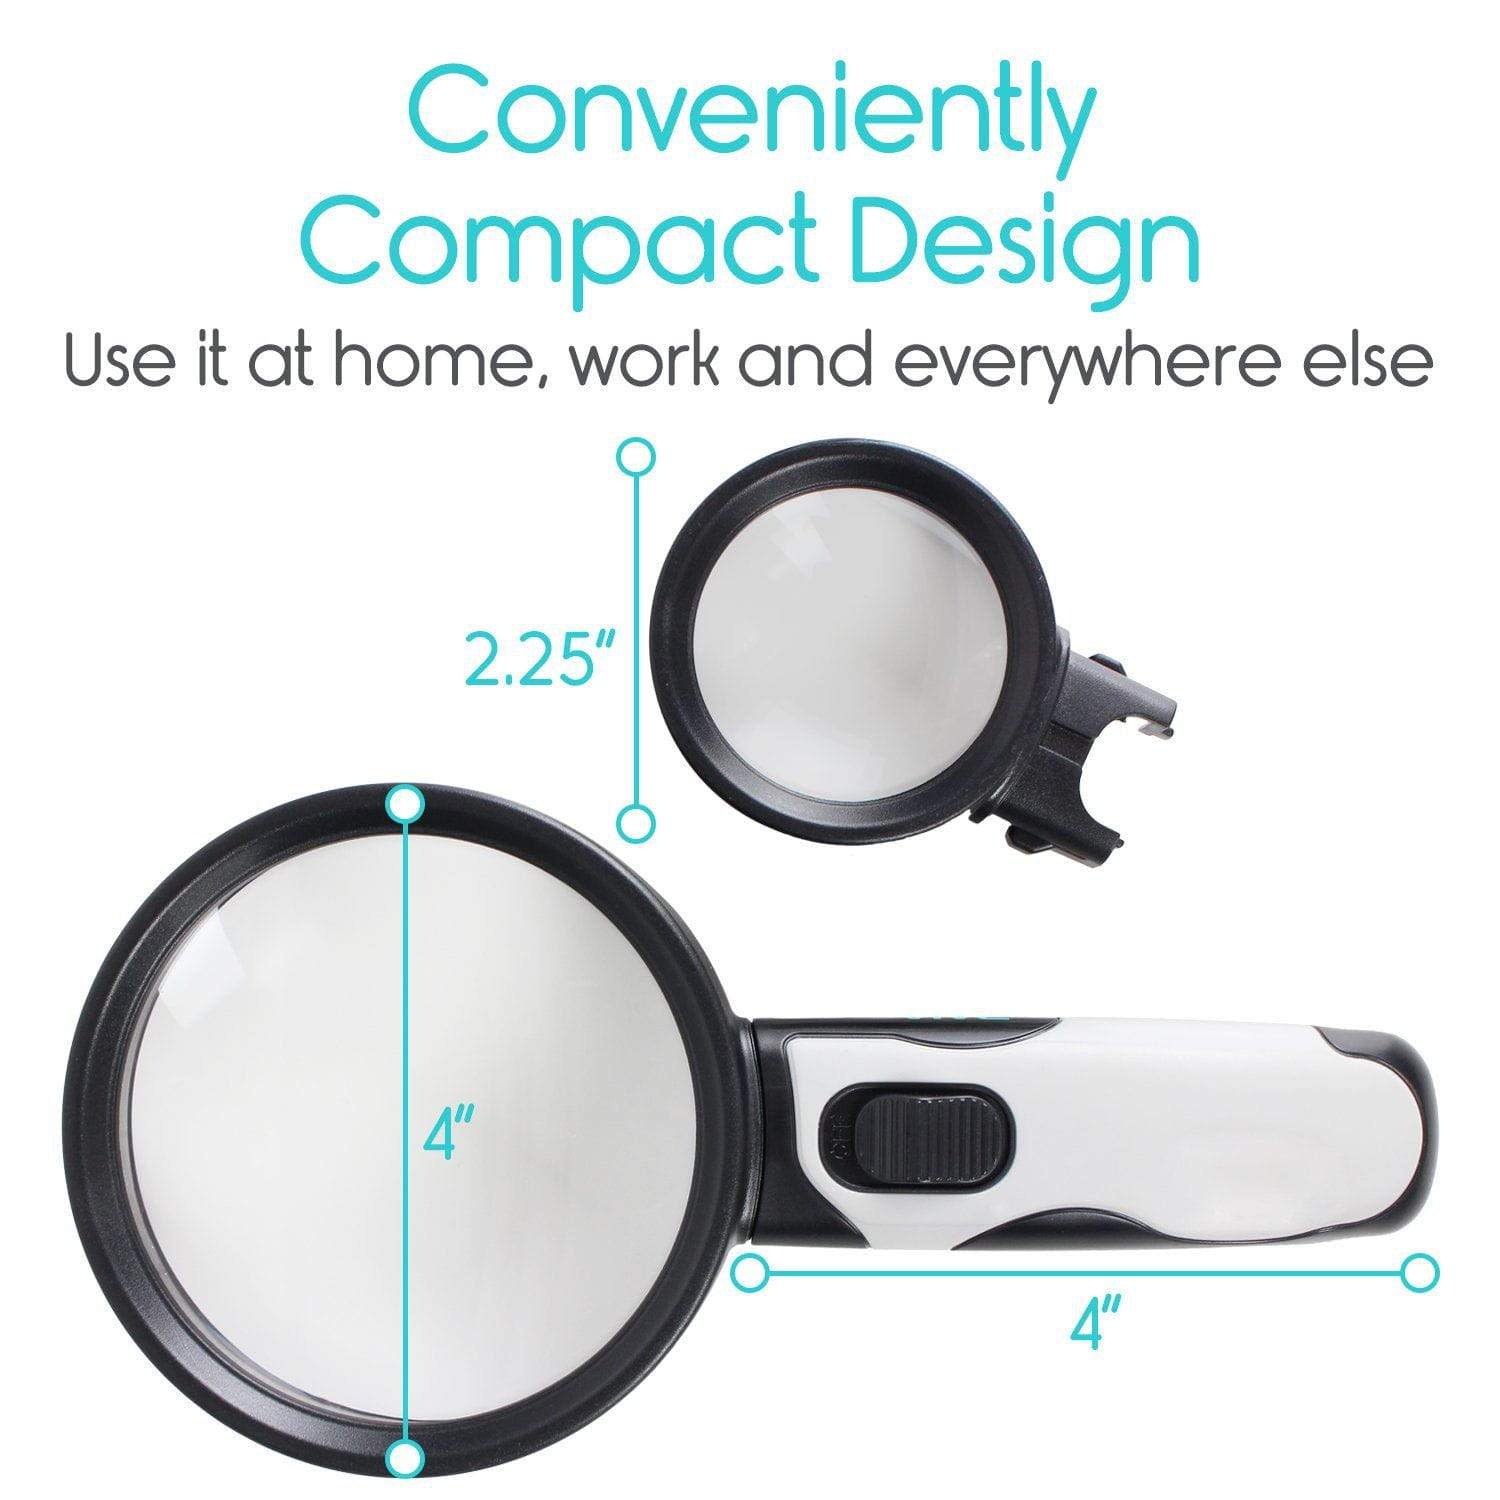 Large 14 Led Handheld Magnifying Glass With Light -5X Lens - Best Jumbo  Size Illuminated Reading Magnifier For Books, Newspapers, Maps, Coins,  Jewelry, Hobbies, Crafts 